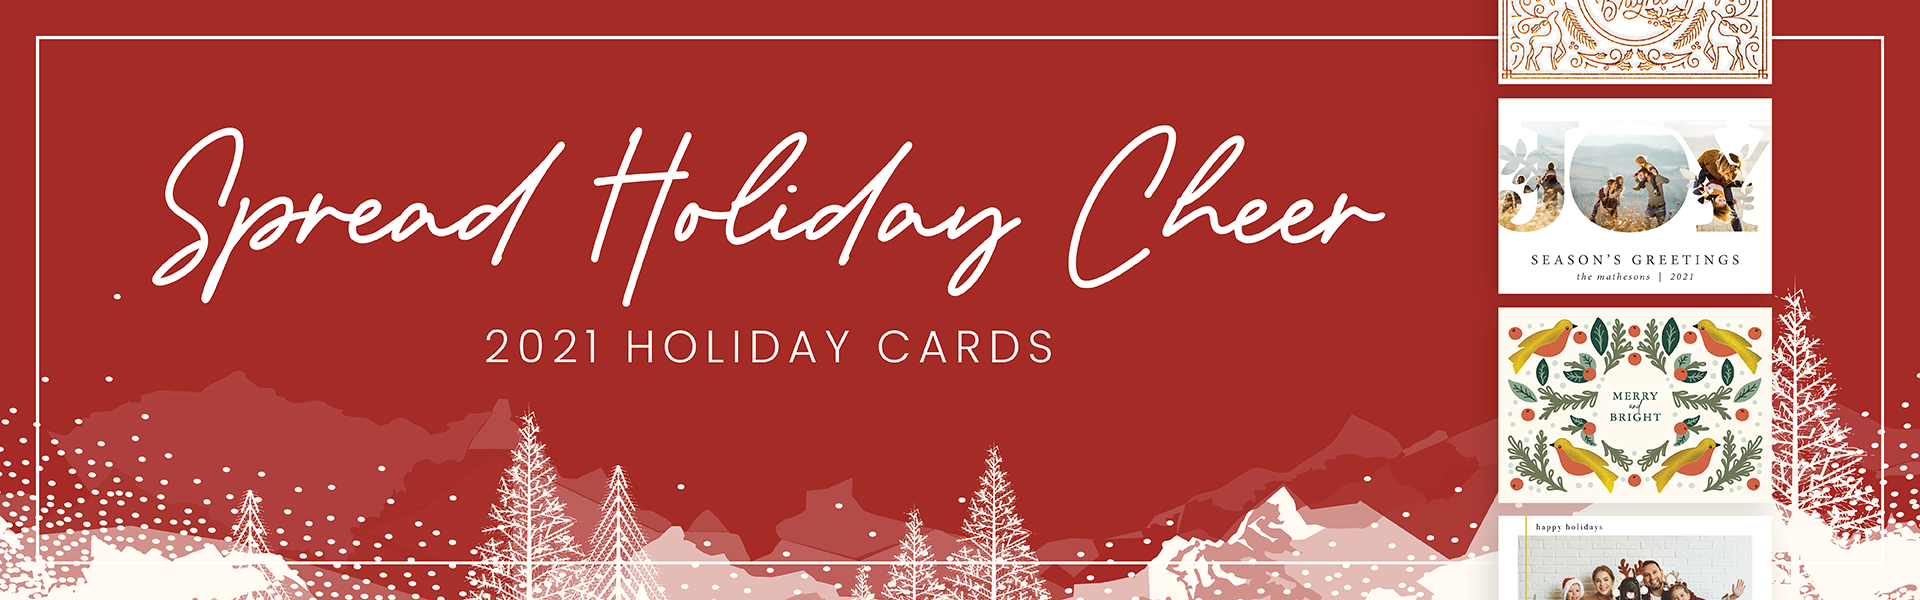 Spread holiday cheer. Holiday Greeting Cards by Leech Printing Ltd.